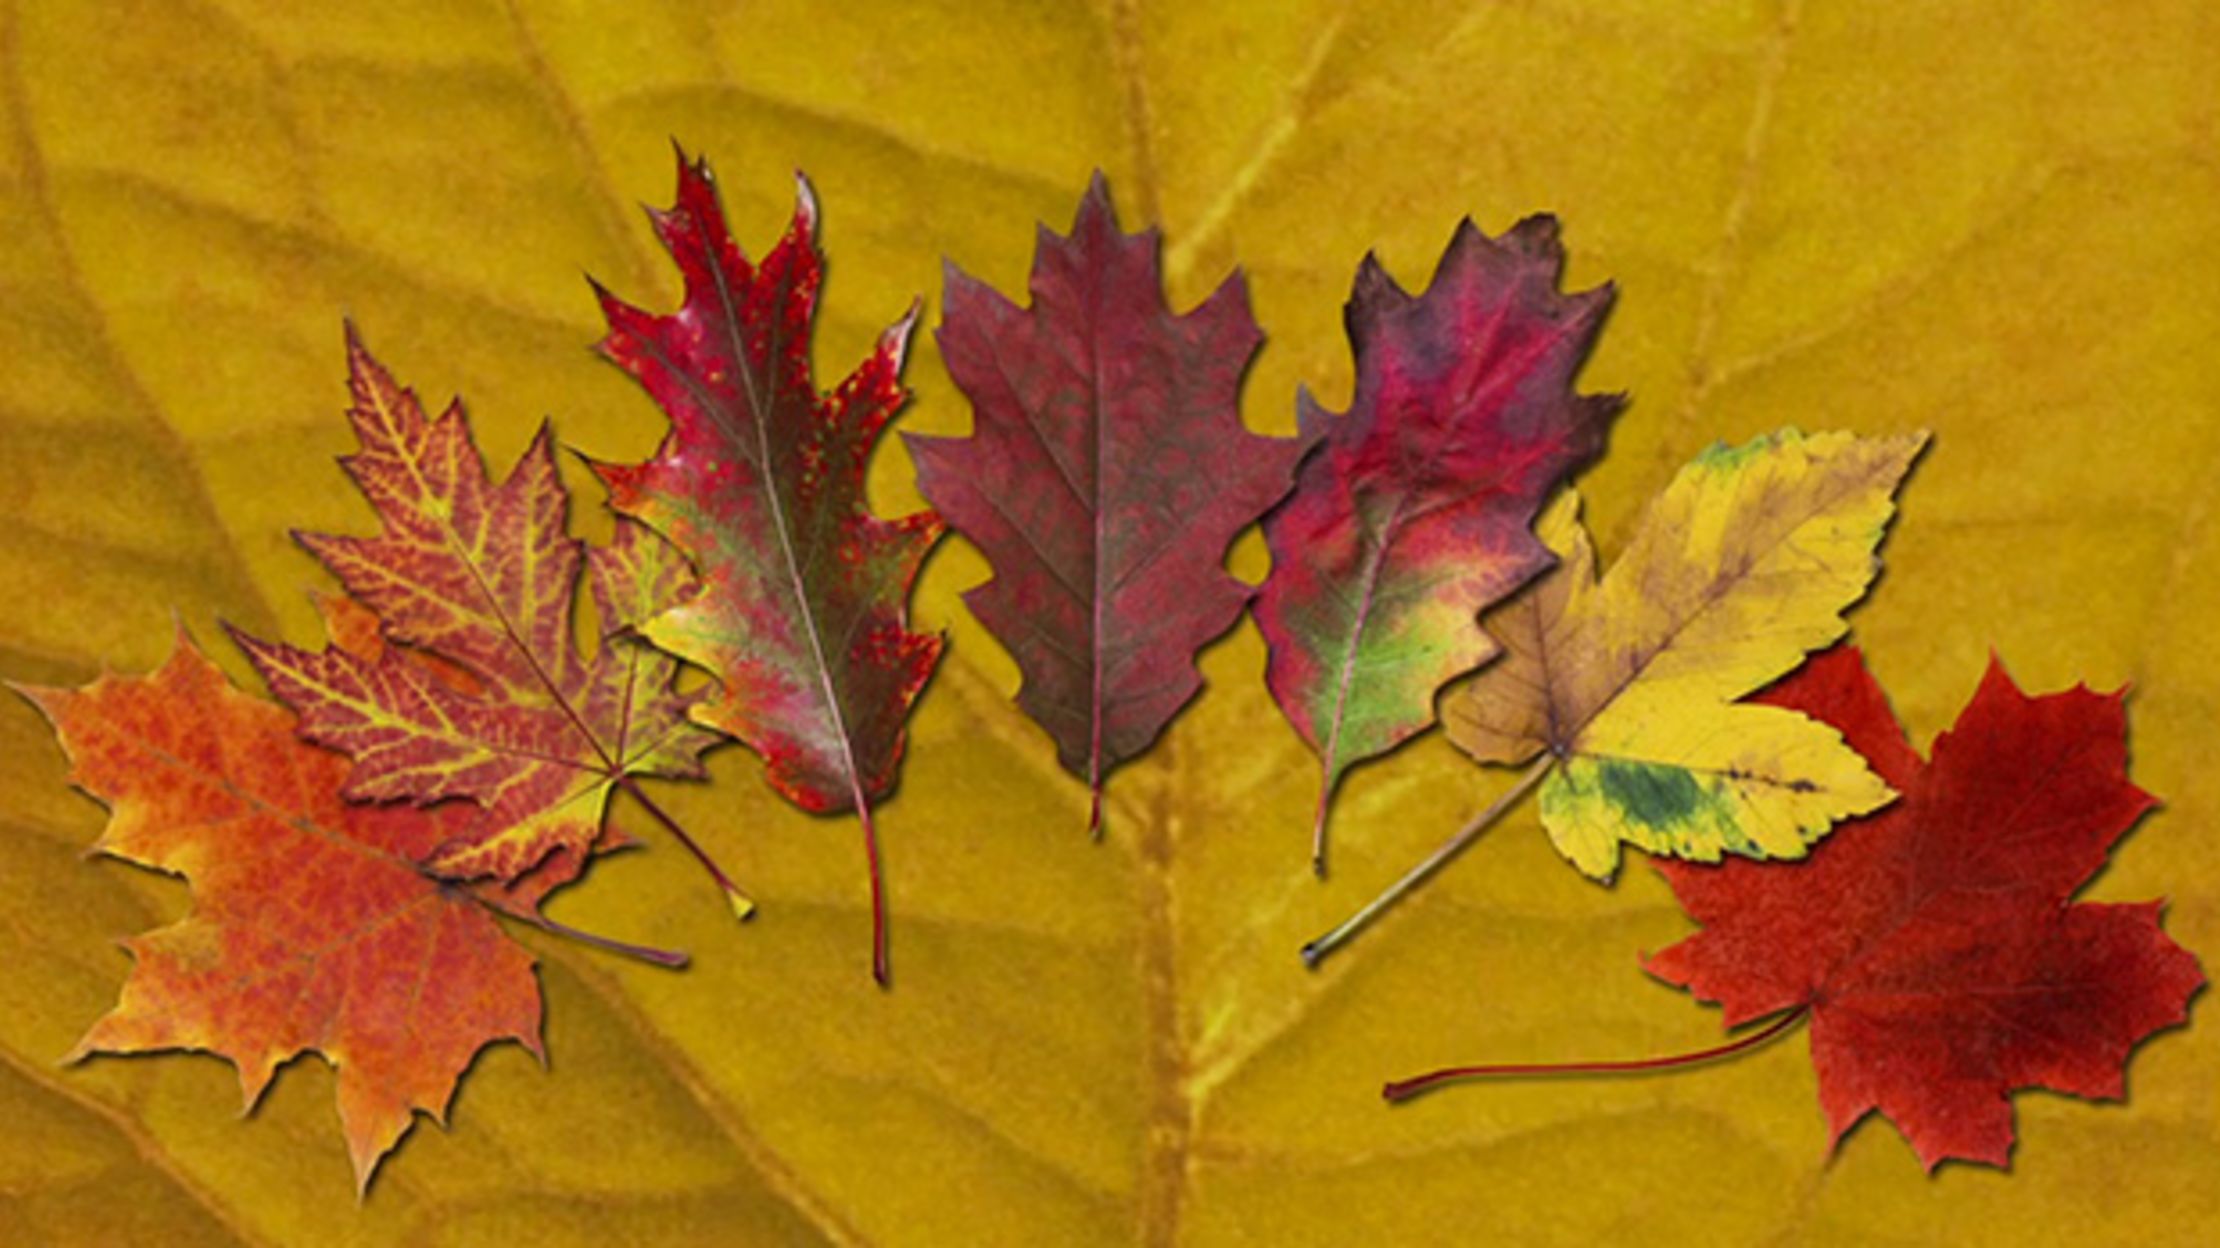 Why Do Leaves Change Color in Autumn? | Mental Floss